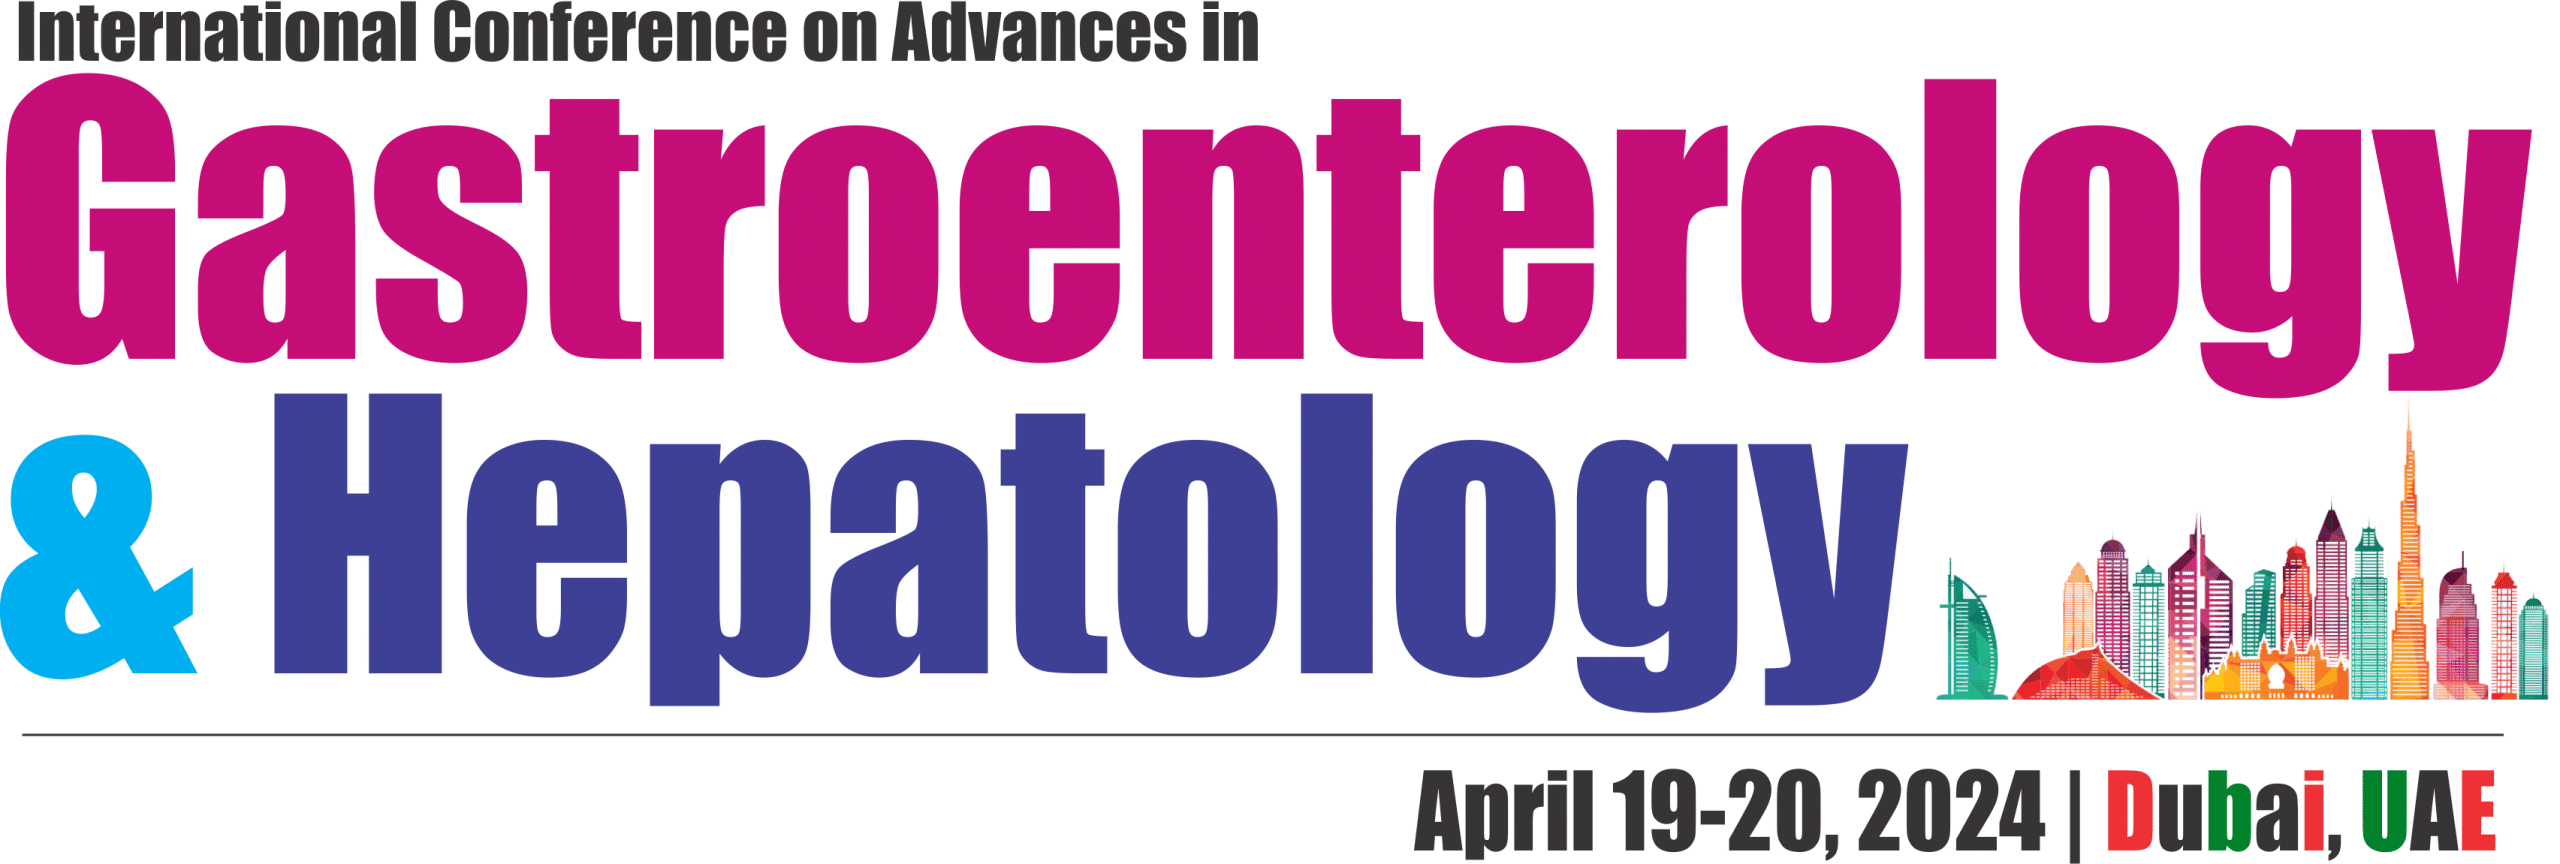 2nd International Conference on Advances in Gastroenterology and Hepatology 2024